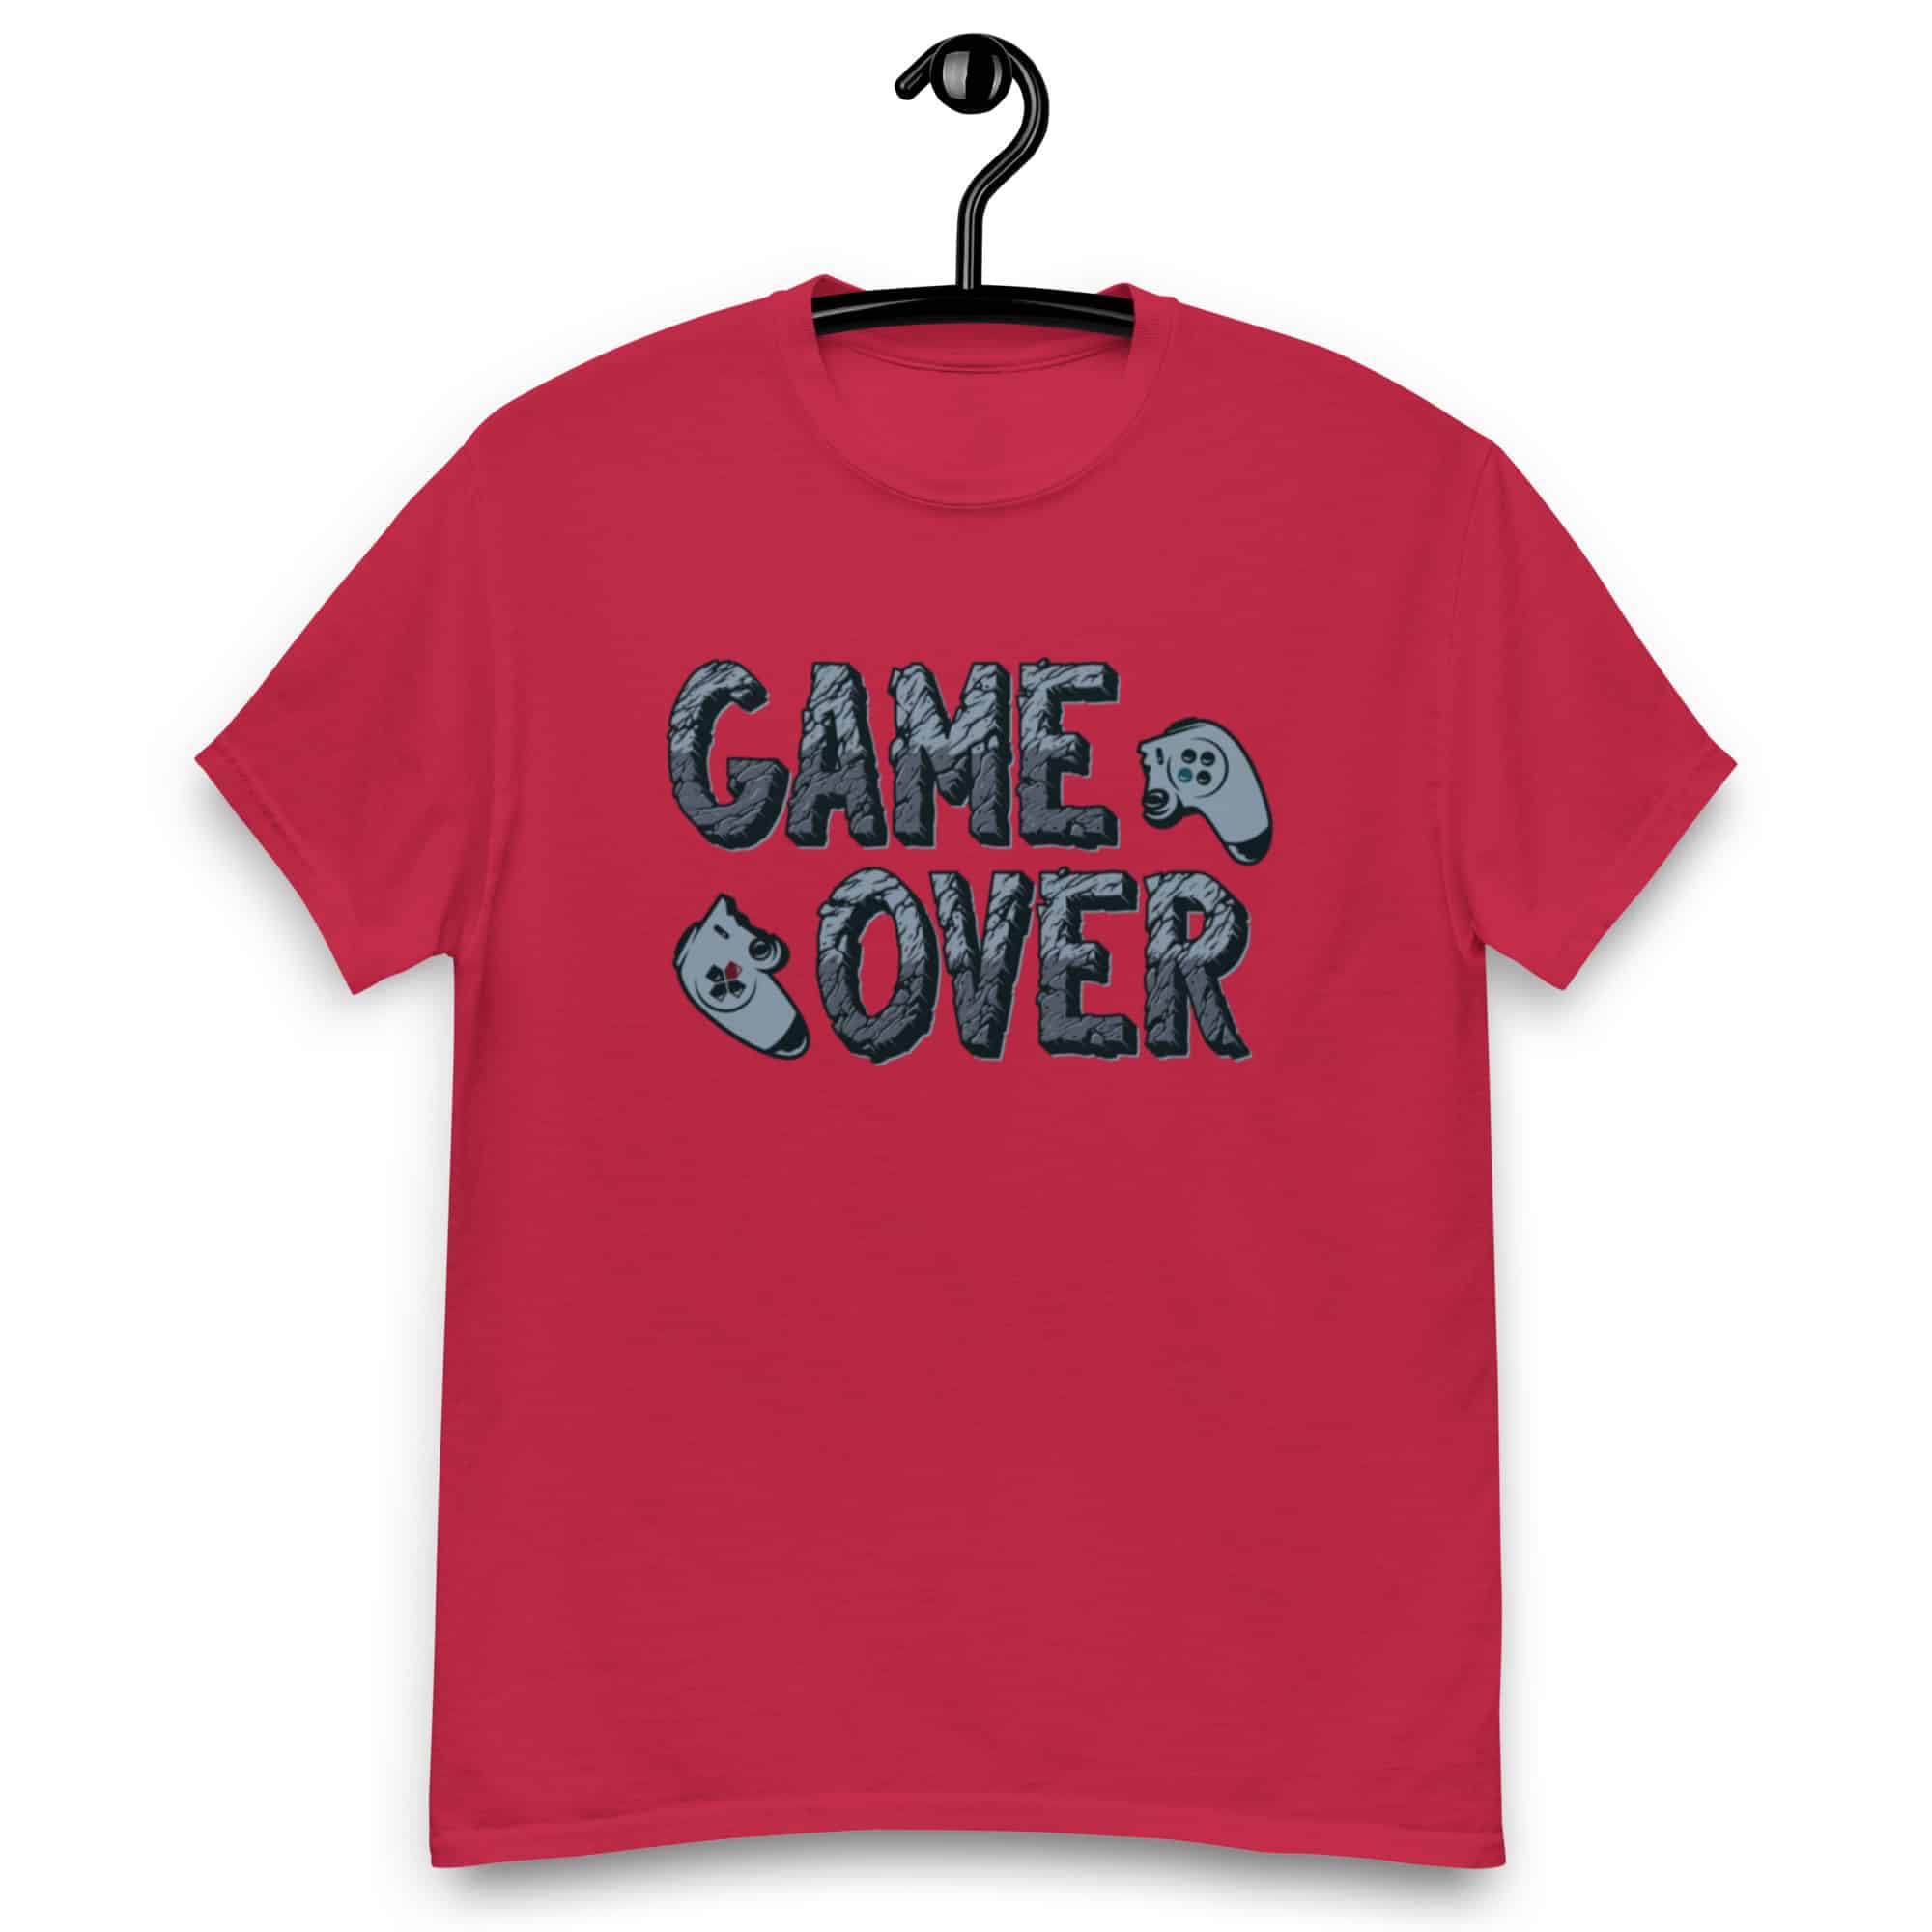 Game Over Shirt Men's graphic t-shirts Men's designer shirts Premium sweatshirts Unisex hoodies Premium hooded sweatshirts Designer sweatshirts High-quality sweatshirts Luxury sweatshirts Unisex fleece sweatshirts Premium pullover sweatshirts Unisex heavyweight sweatshirts Premium cotton sweatshirts Video game store Gaming merchandise Gaming accessories shop Online gaming store Video game shop near me Gaming console store PC gaming store Gaming gear shop Retro gaming shop Board game shop Anime merchandise Anime store online Japanese anime shop Anime figurines Manga shop Anime DVDs Anime accessories Anime apparel Anime collectibles Anime gifts